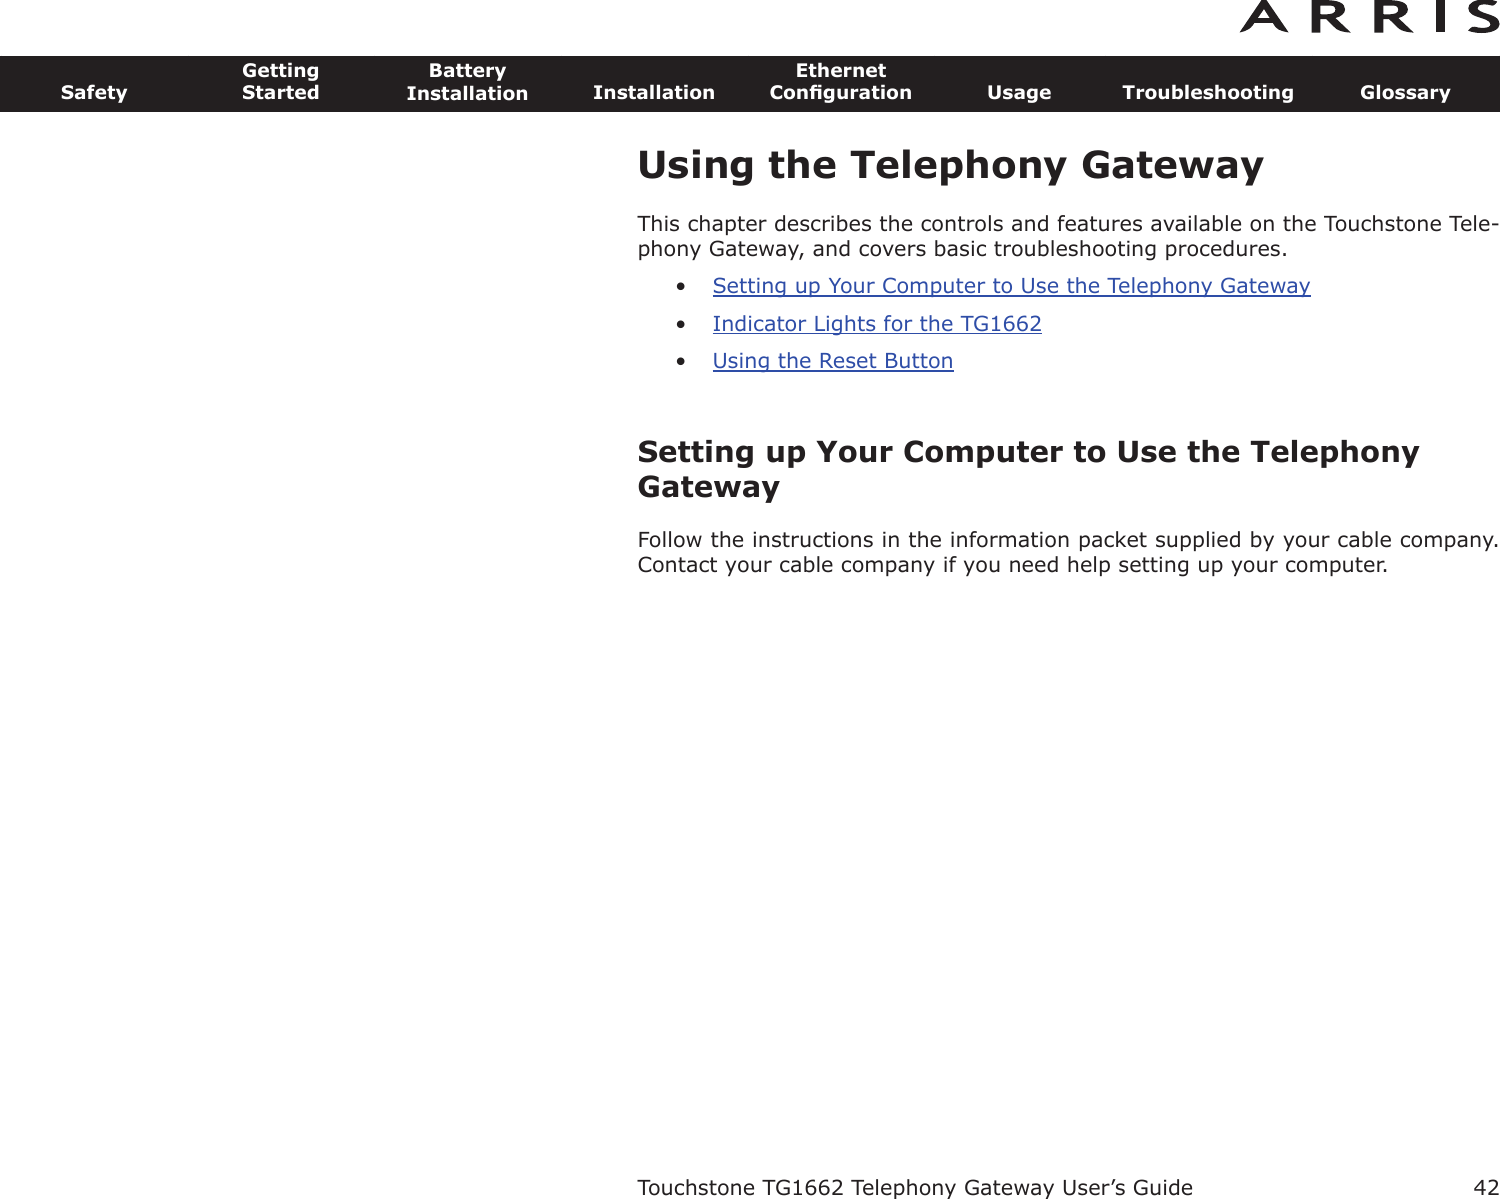 42SafetyGettingStartedBatteryInstallation InstallationEthernetConﬁguration Usage Troubleshooting GlossaryTouchstone TG1662 Telephony Gateway User’s GuideUsing the Telephony GatewayThis chapter describes the controls and features available on the Touchstone Tele-phony Gateway, and covers basic troubleshooting procedures.•Setting up Your Computer to Use the Telephony Gateway•Indicator Lights for the TG1662•Using the Reset ButtonSetting up Your Computer to Use the TelephonyGatewayFollow the instructions in the information packet supplied by your cable company.Contact your cable company if you need help setting up your computer.